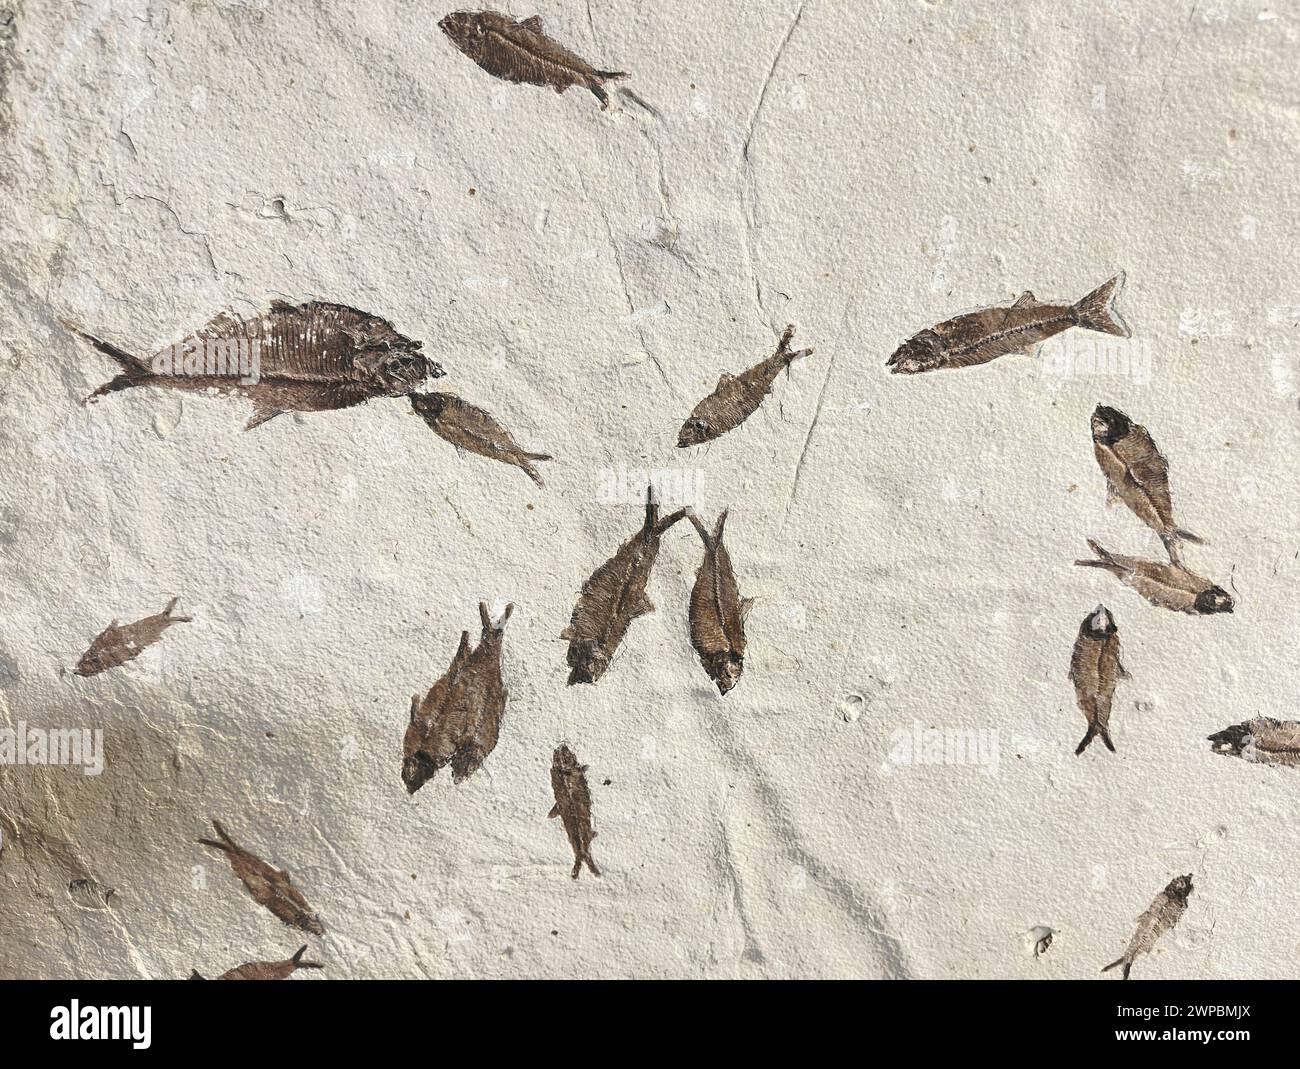 Large flat rock Knightia Death Plate displays fossils of small boned fish related to herring found in Green River area of Wyoming. See bones & fins. Stock Photo